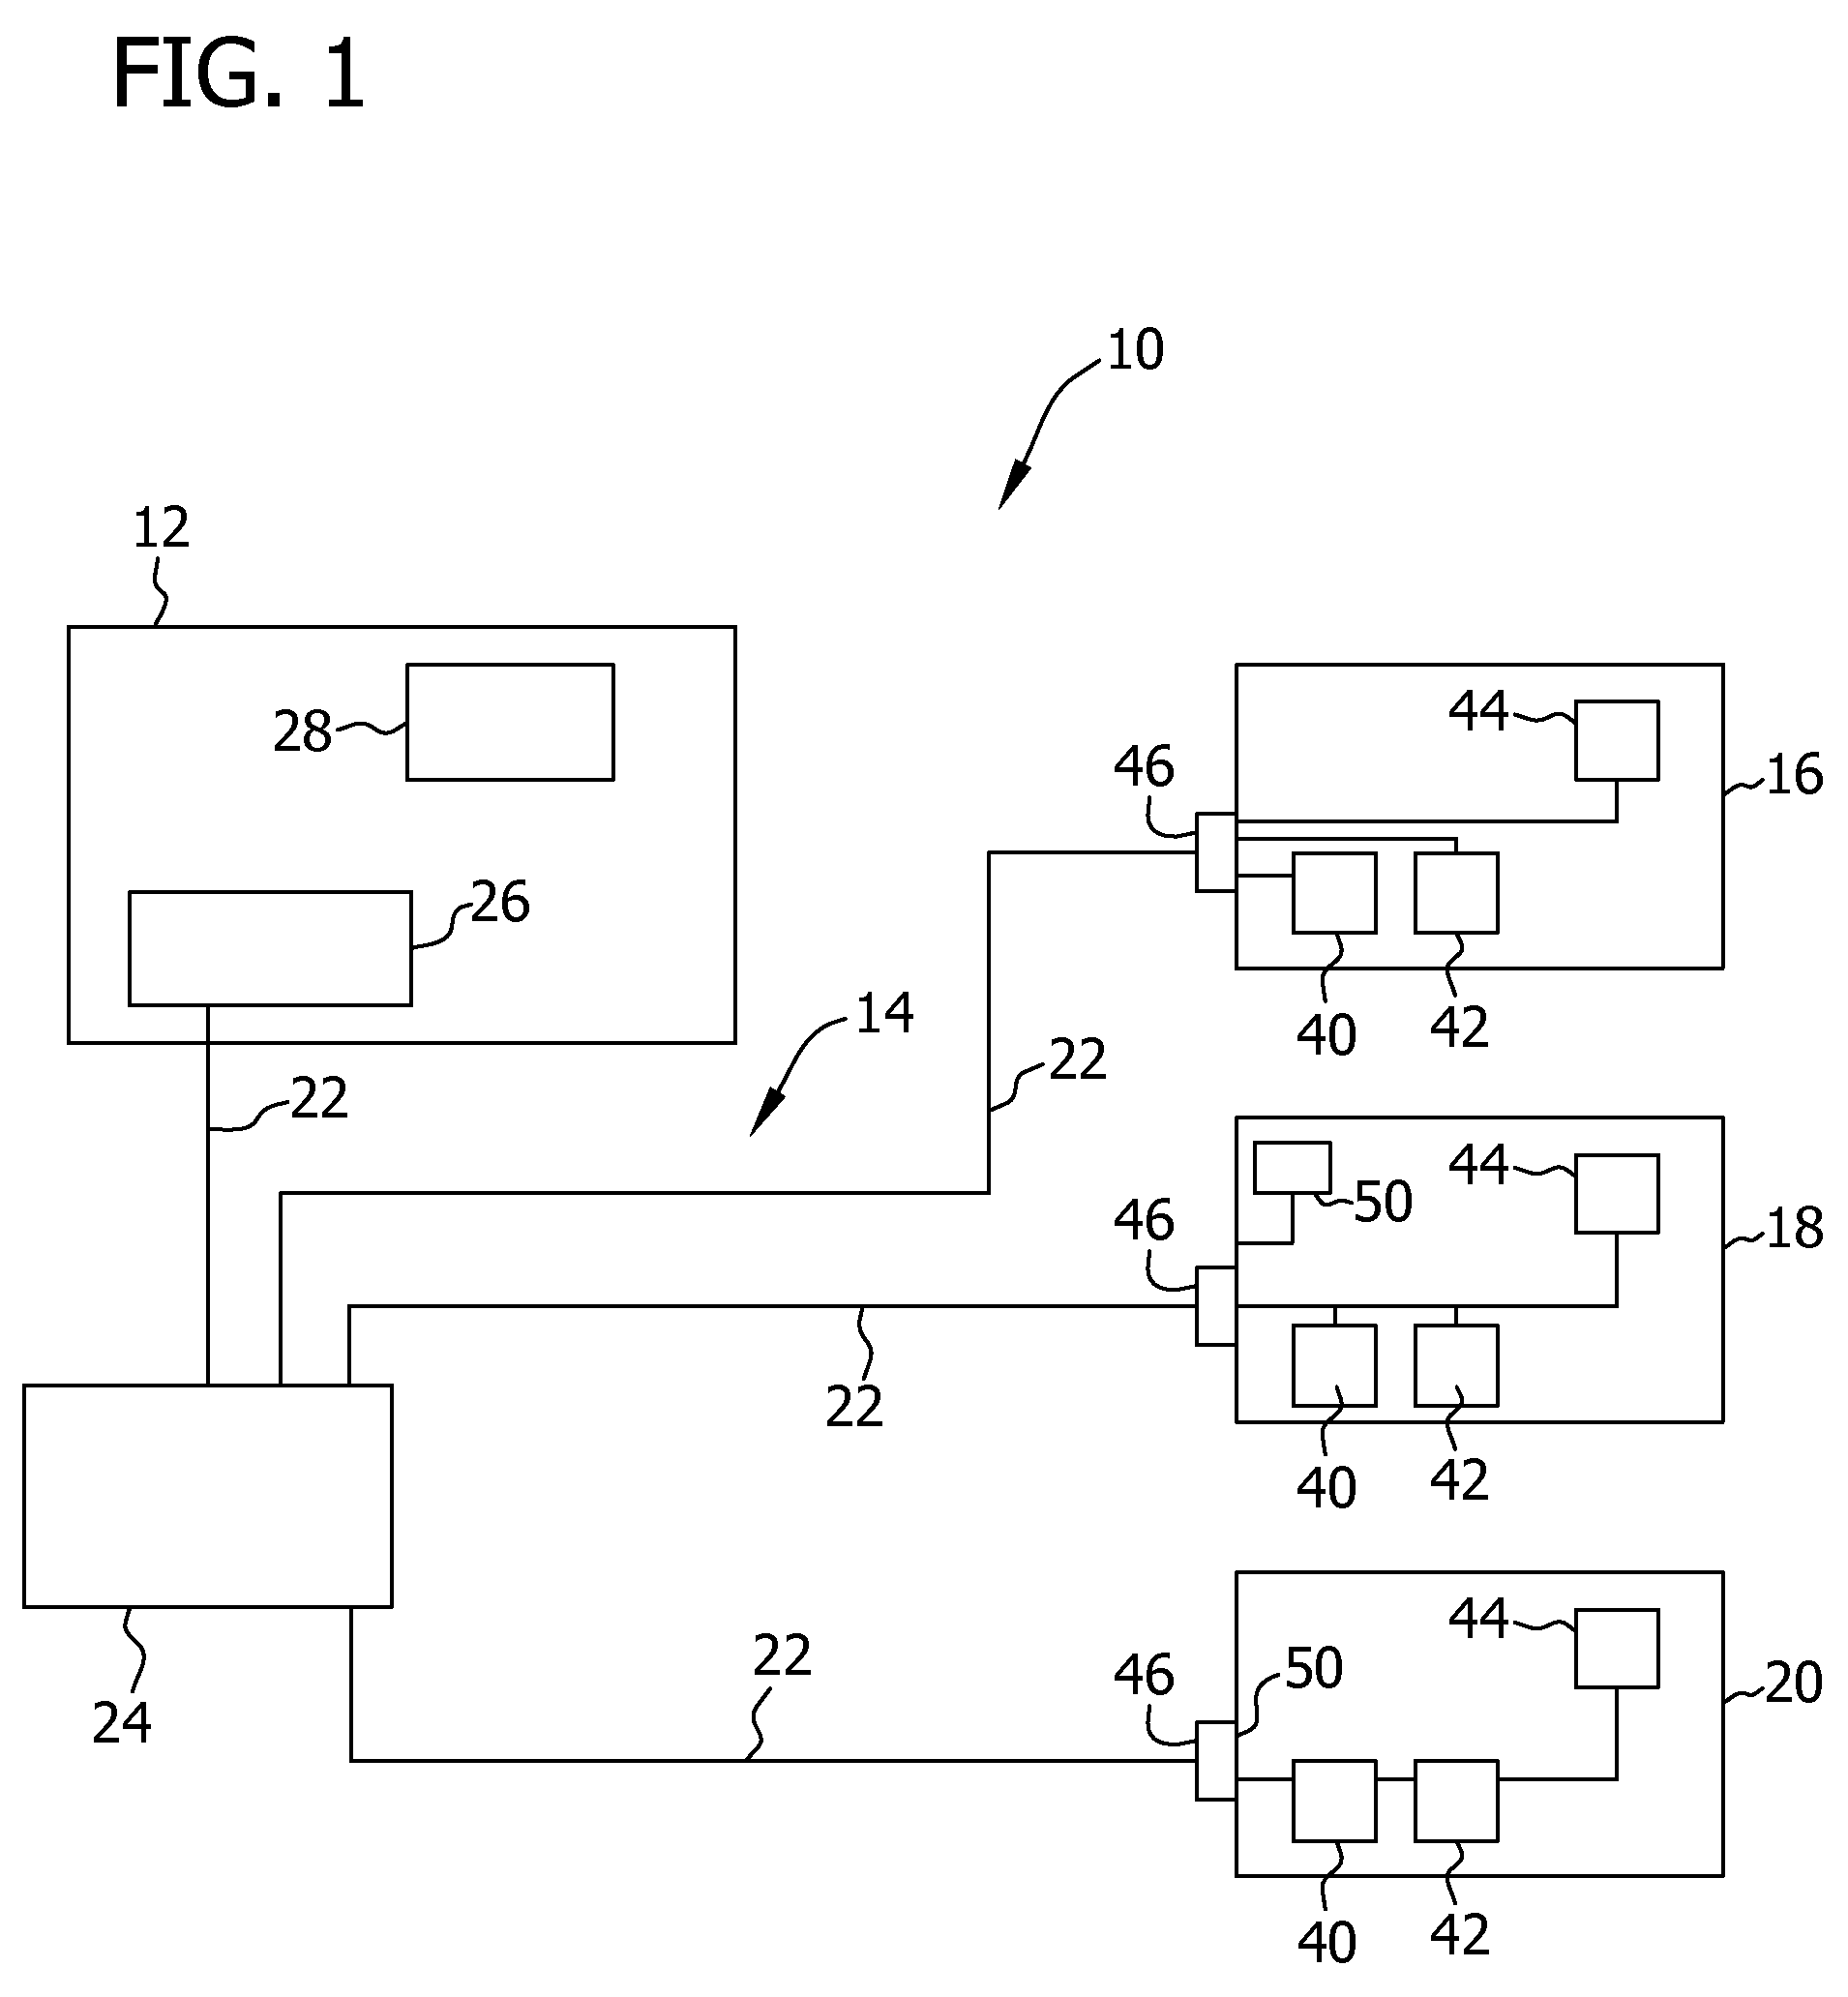 Method and system for managing a load demand on an electrical grid